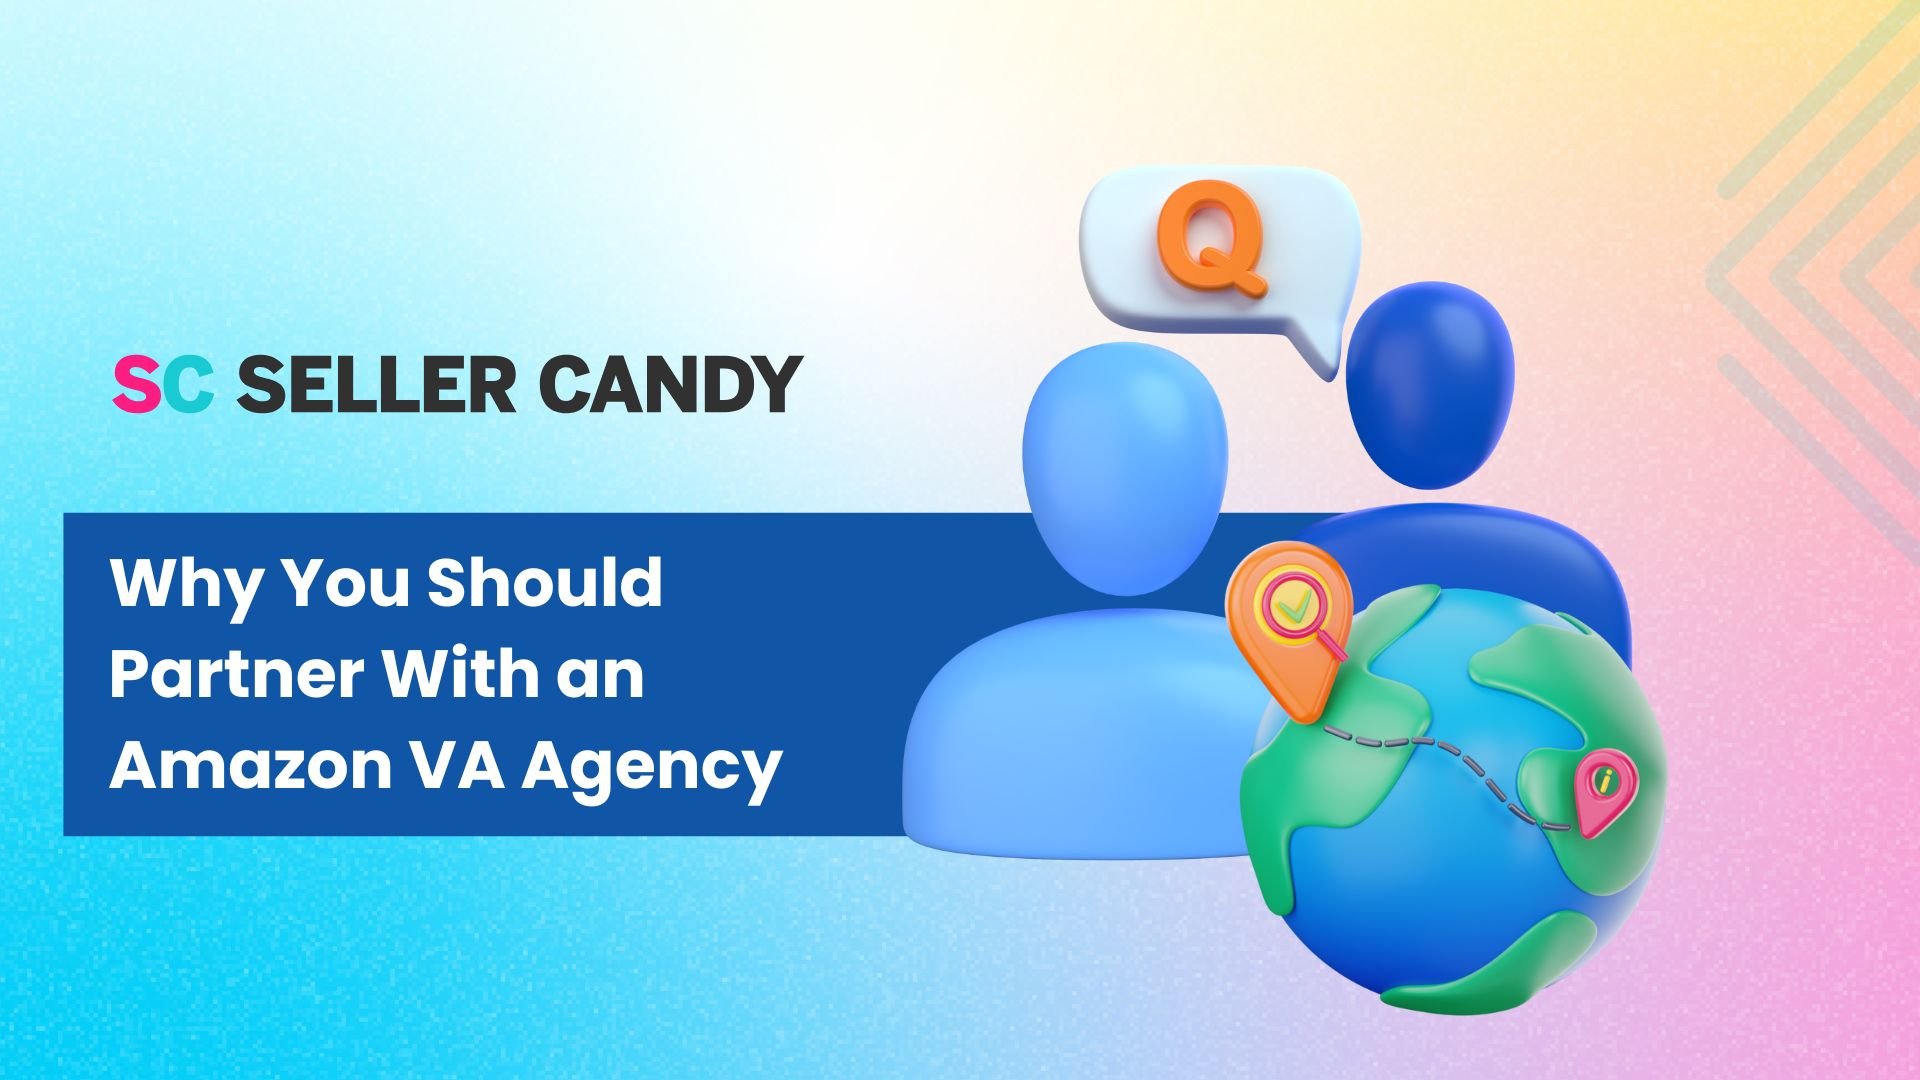 Why You Should Partner With an Amazon VA Agency